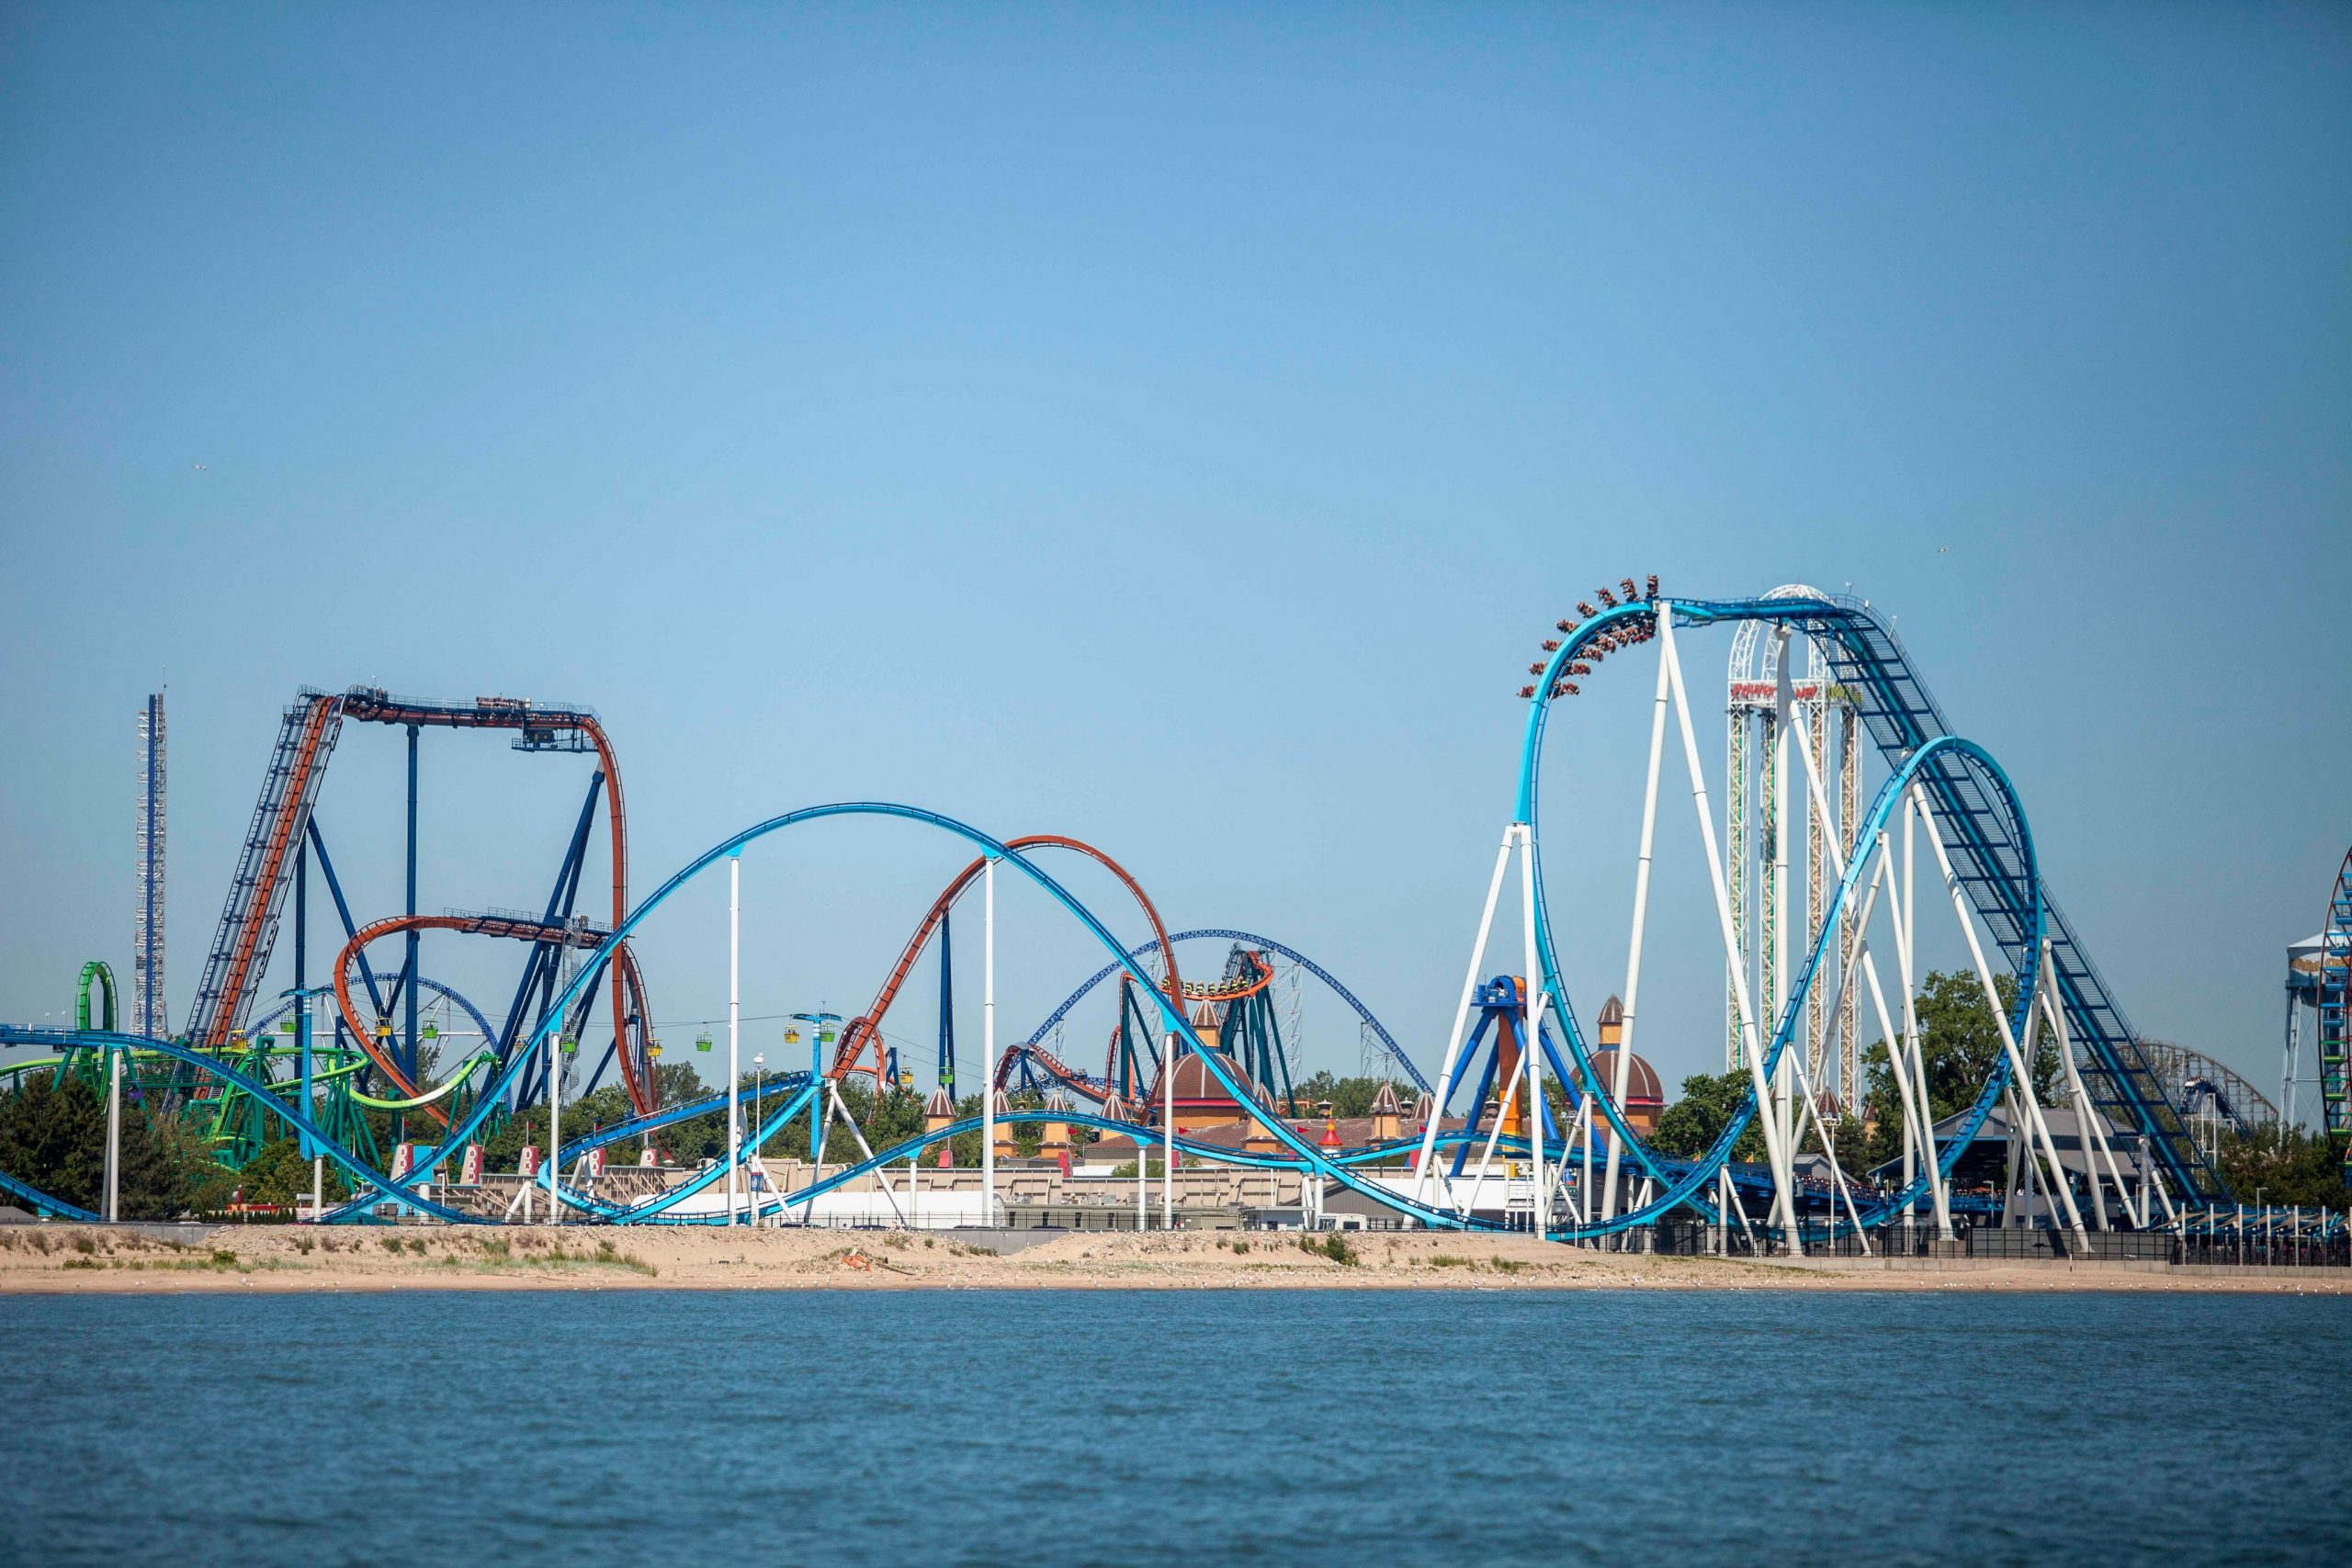 The Cedar Point skyline, which is home to several iconic roller coasaters